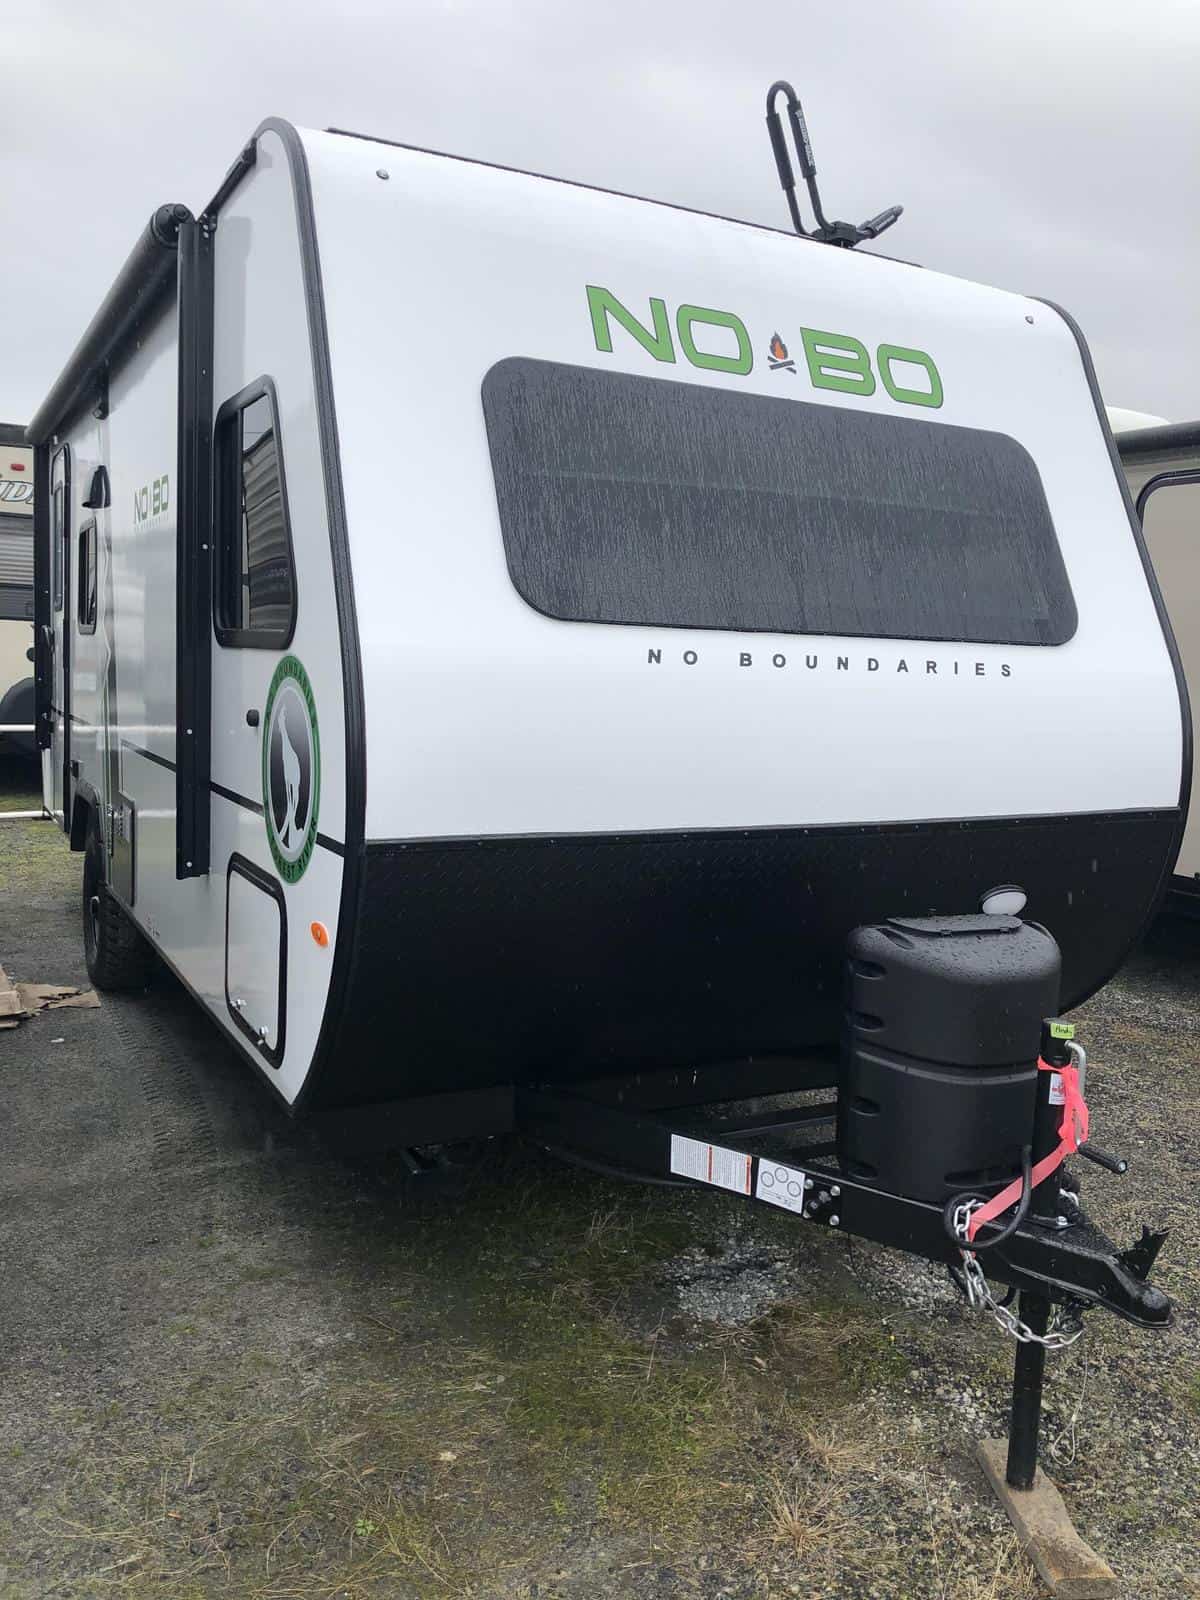 NEW 2019 Forest river No boundaries (nobo) 19.5